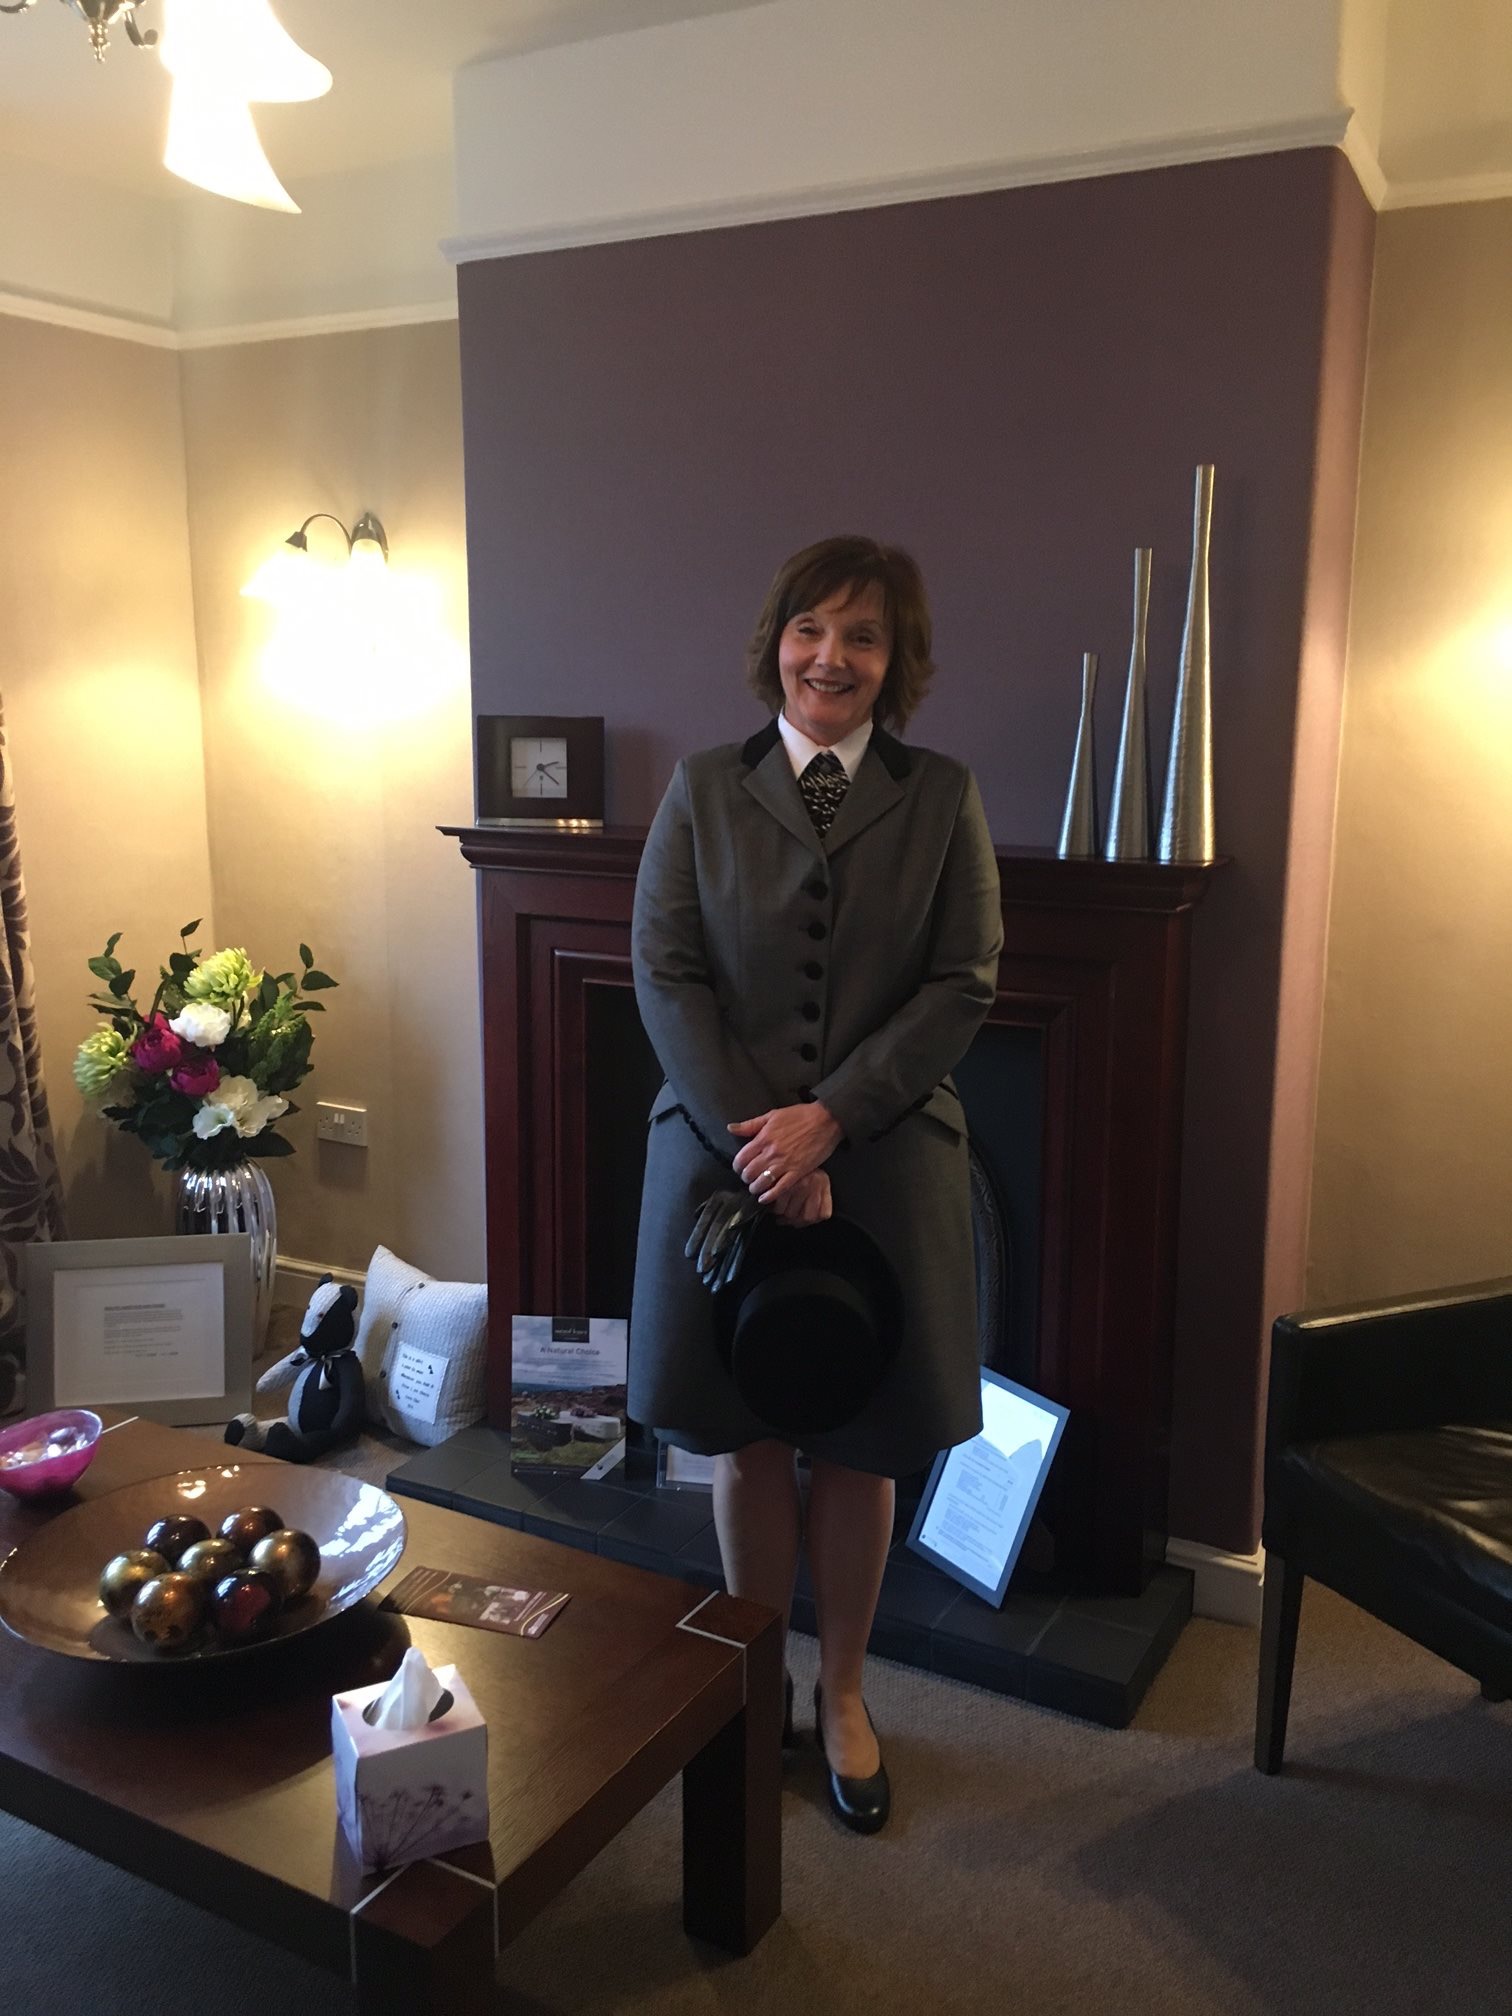 First Lady Funeral Director at Whitehouse Funeral Service